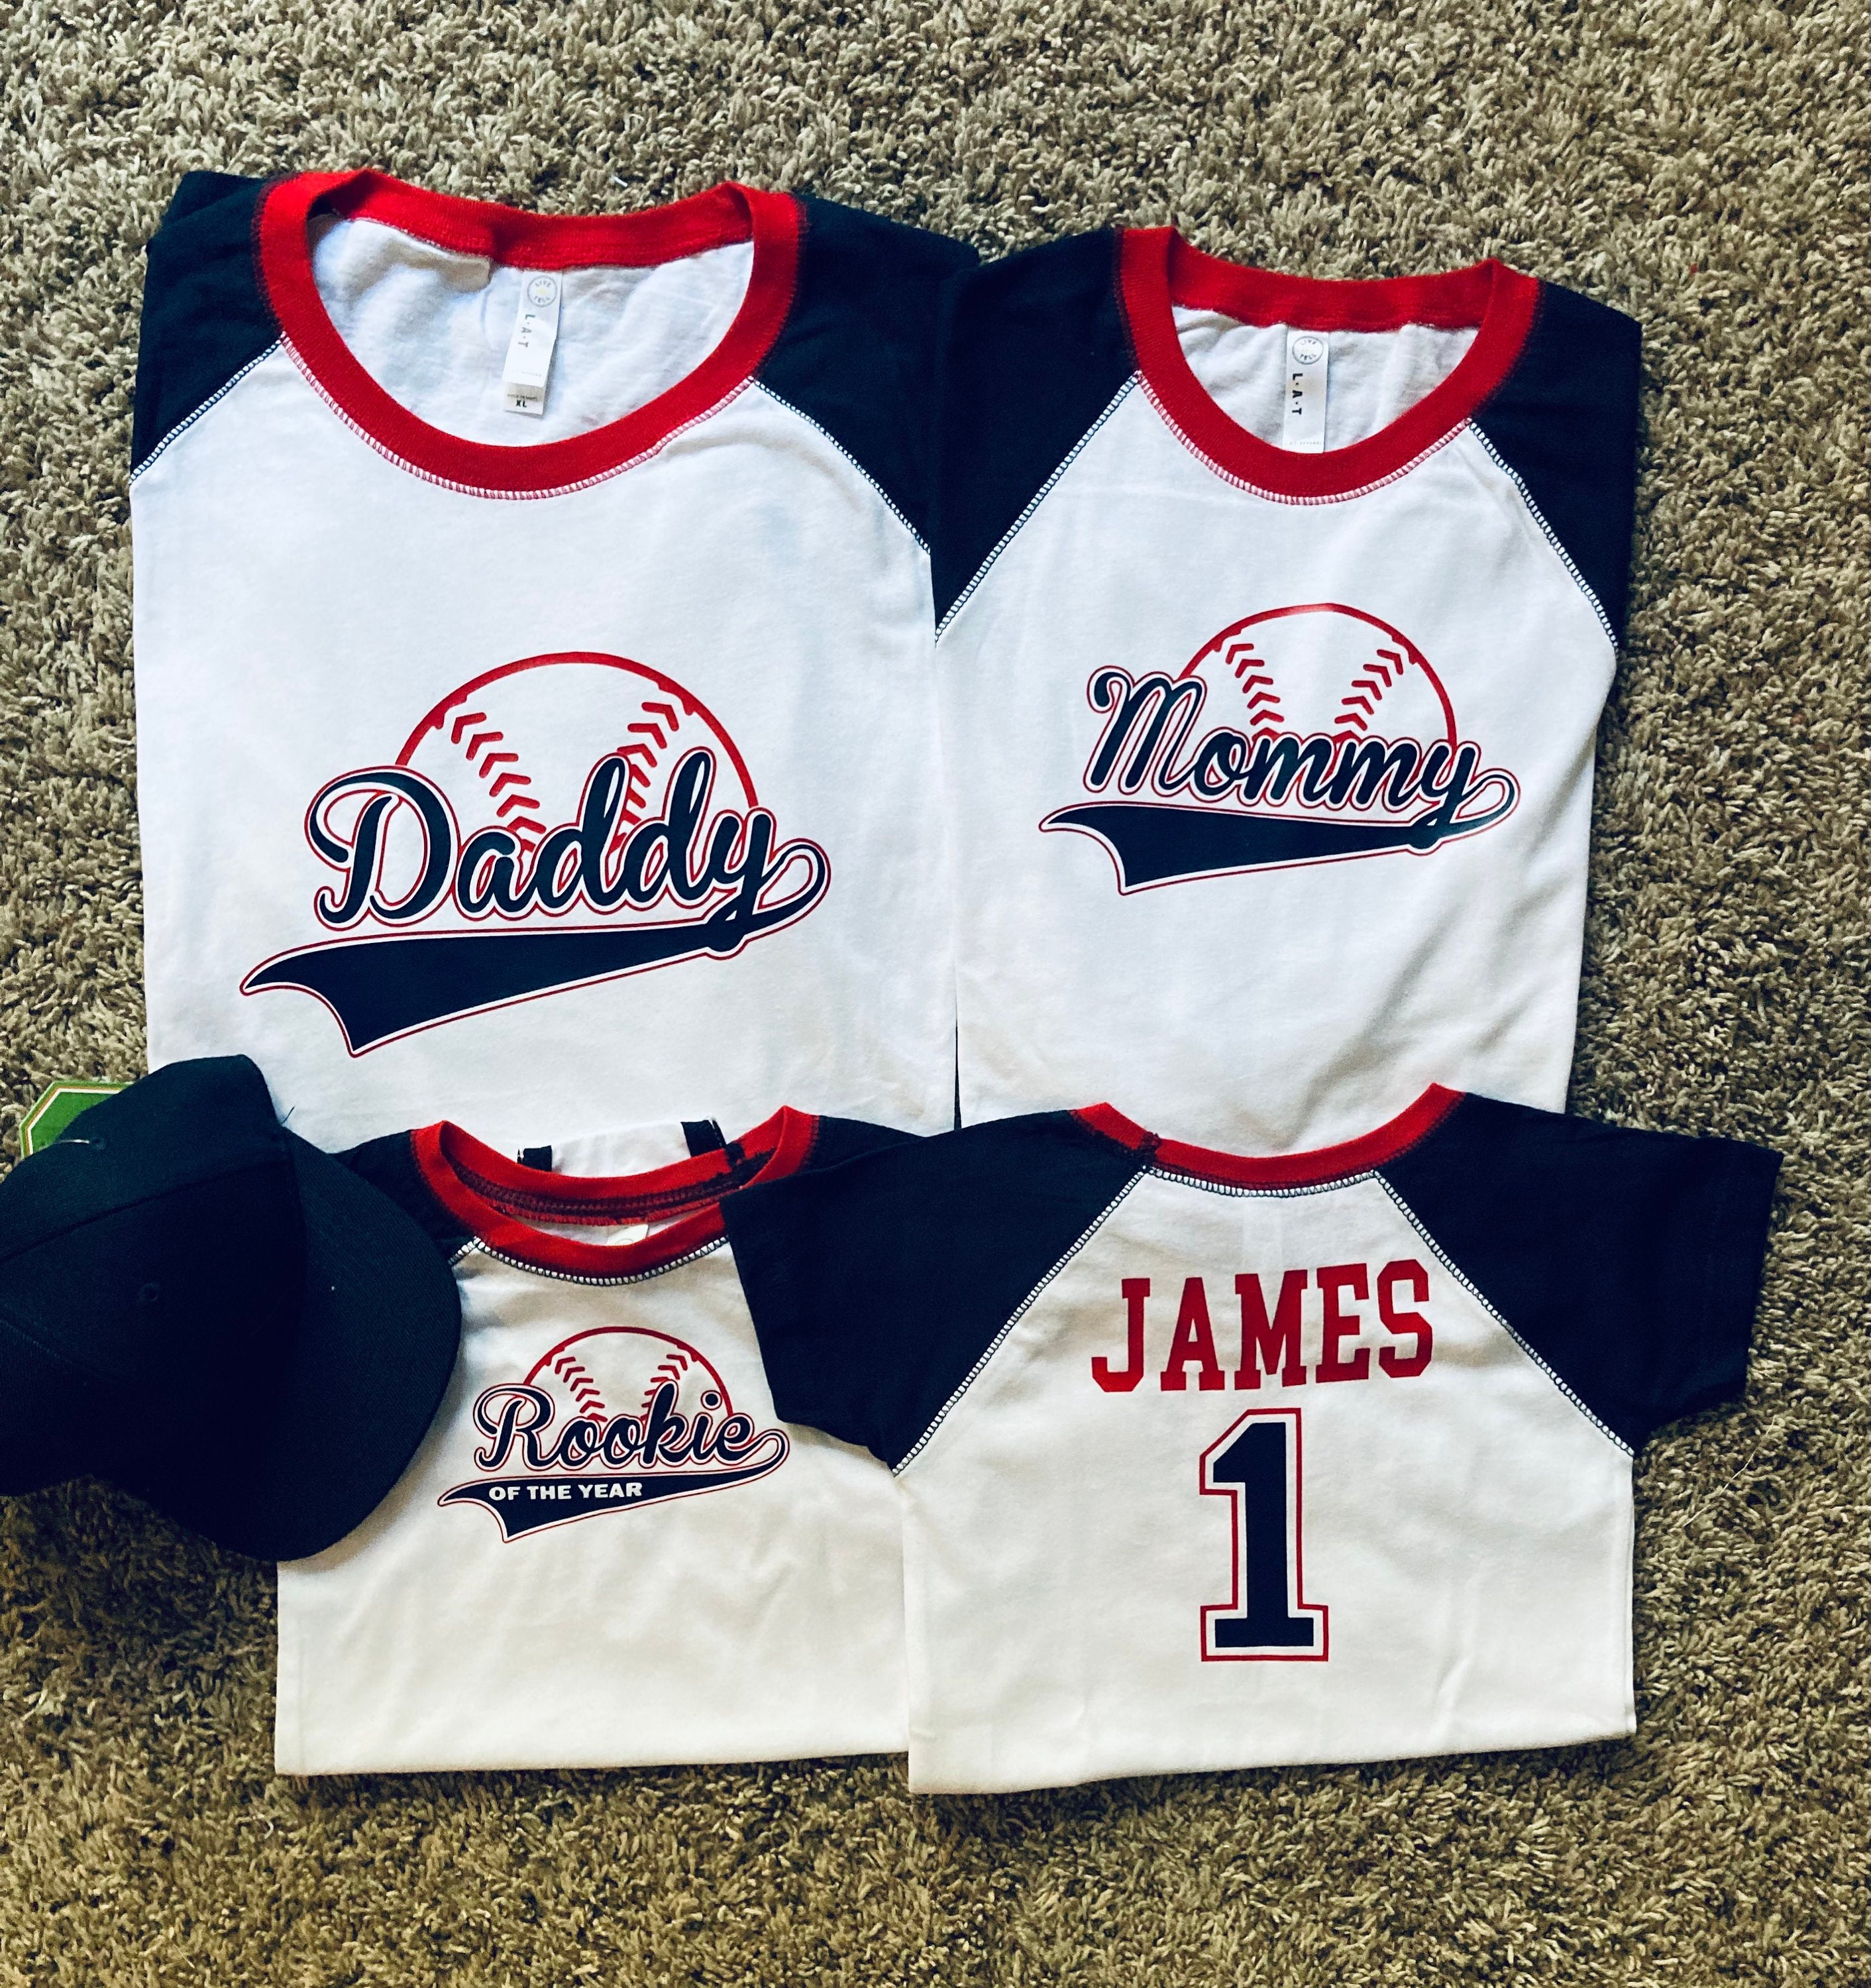  Custom Basketball Jersey for Men &Boy,Blank Athletic Uniform  Personalized Printed Team Name Number Logo : Clothing, Shoes & Jewelry